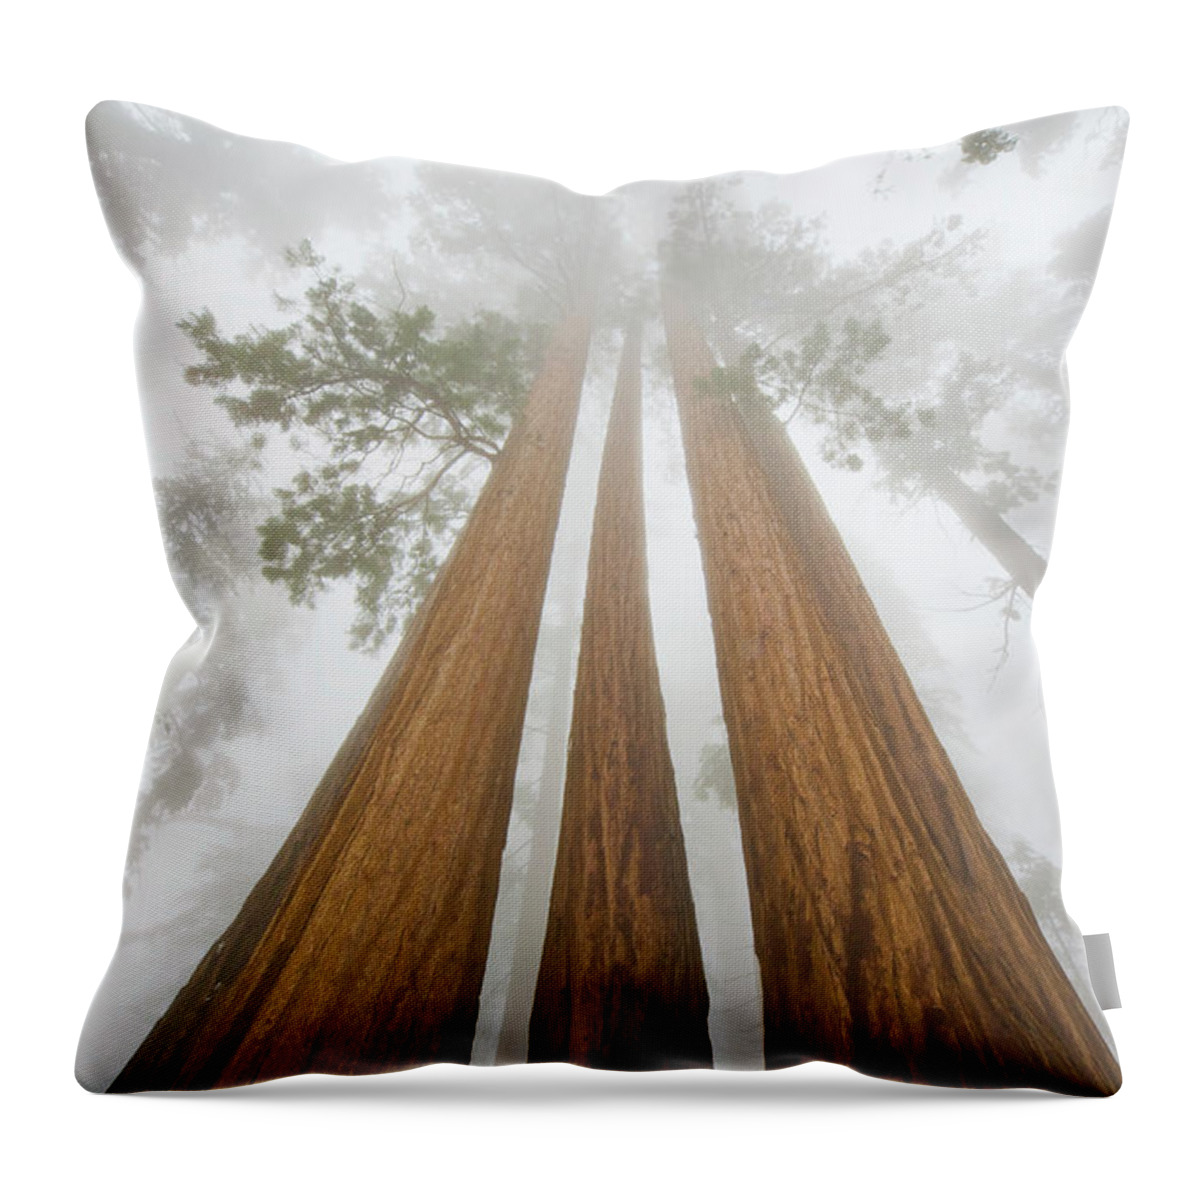 00431220 Throw Pillow featuring the photograph Giant Sequoias In the Fog by Yva Momatiuk John Eastcott